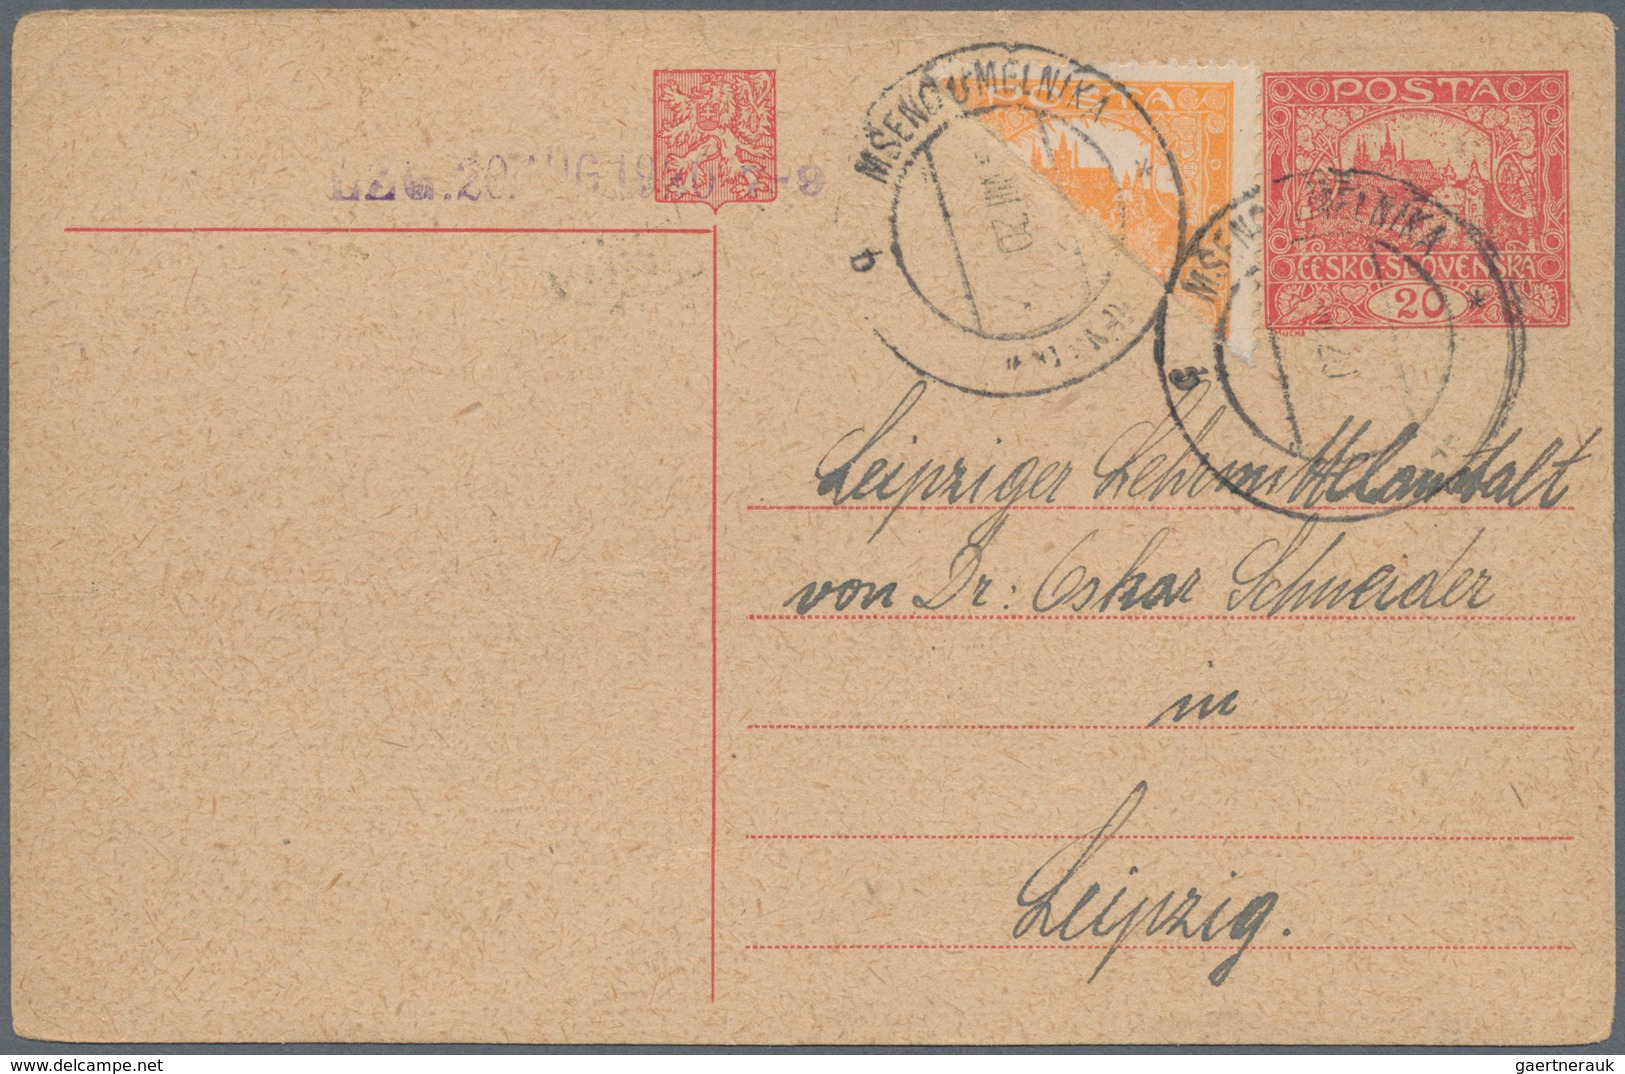 Tschechoslowakei - Ganzsachen: 1920, 20 H Stationery Card Uprated With Half Of 60 H Hradschin Stamp - Cartes Postales